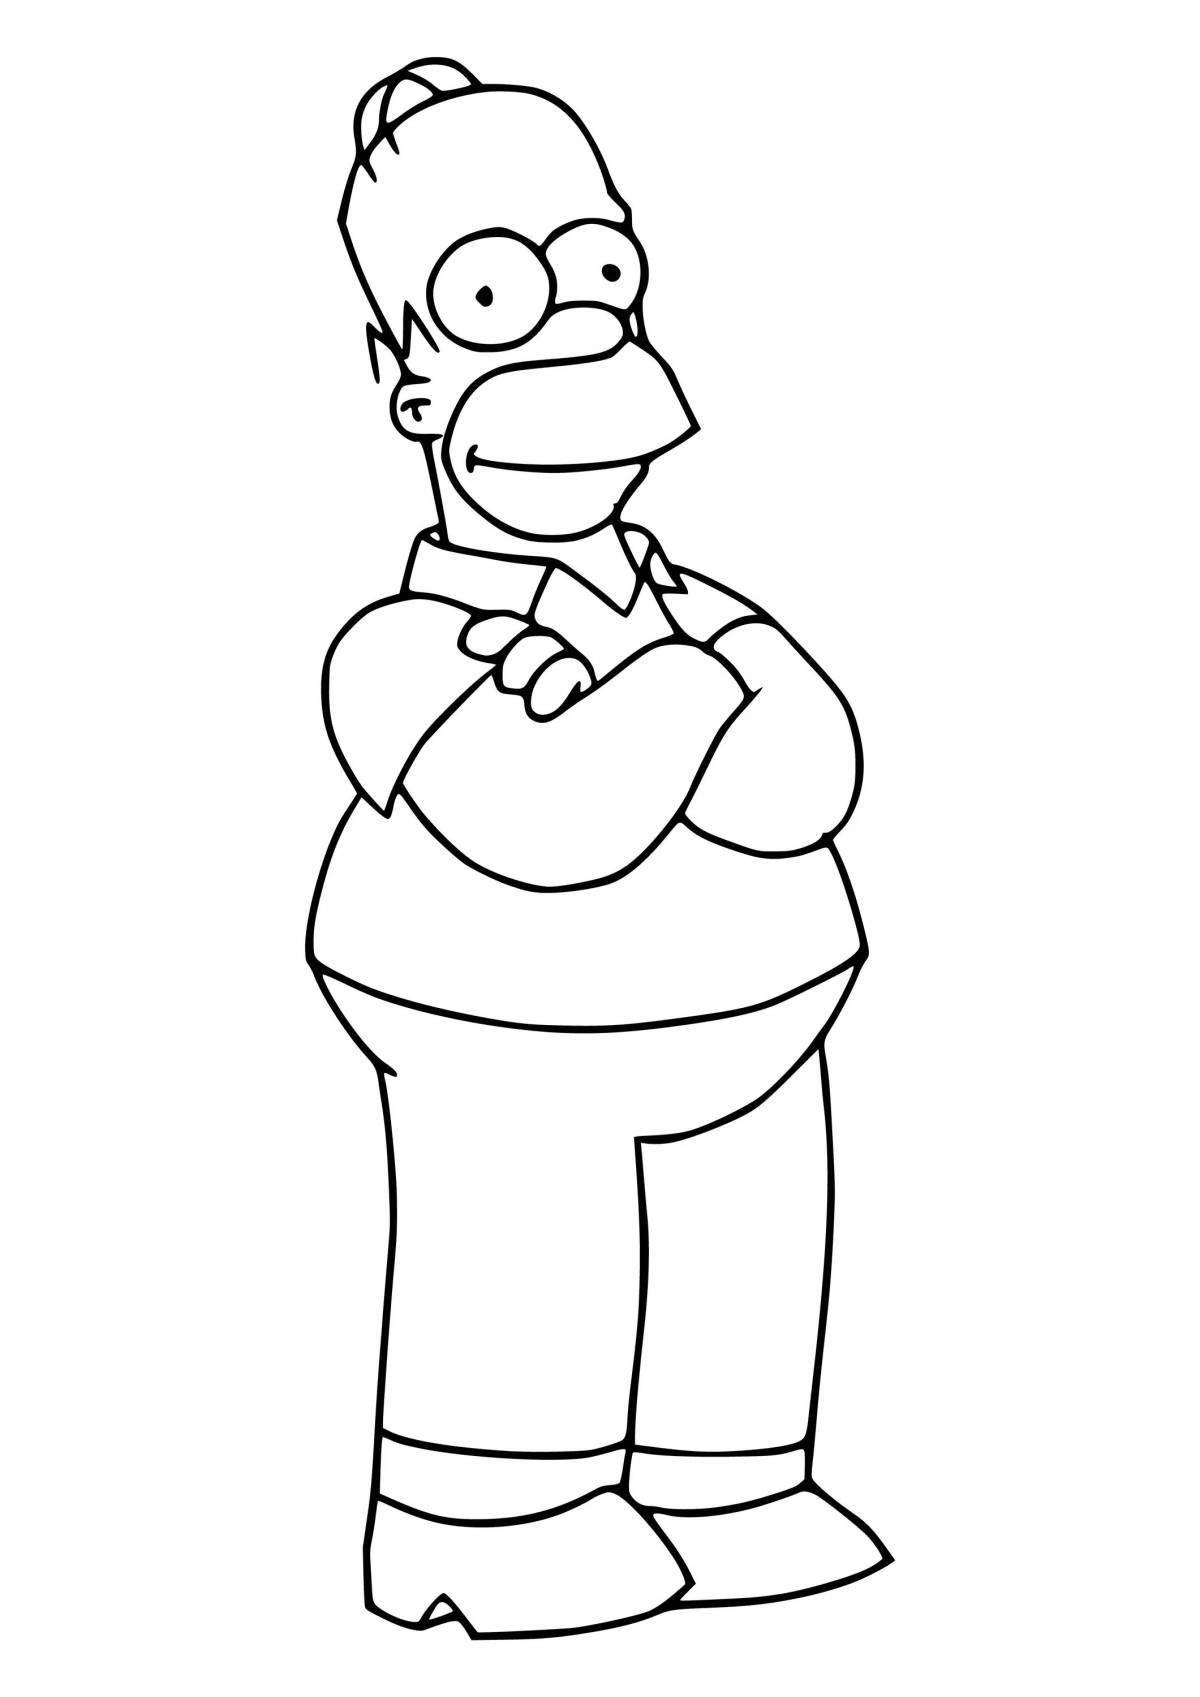 Homer Simpson coloring pages with crazy color